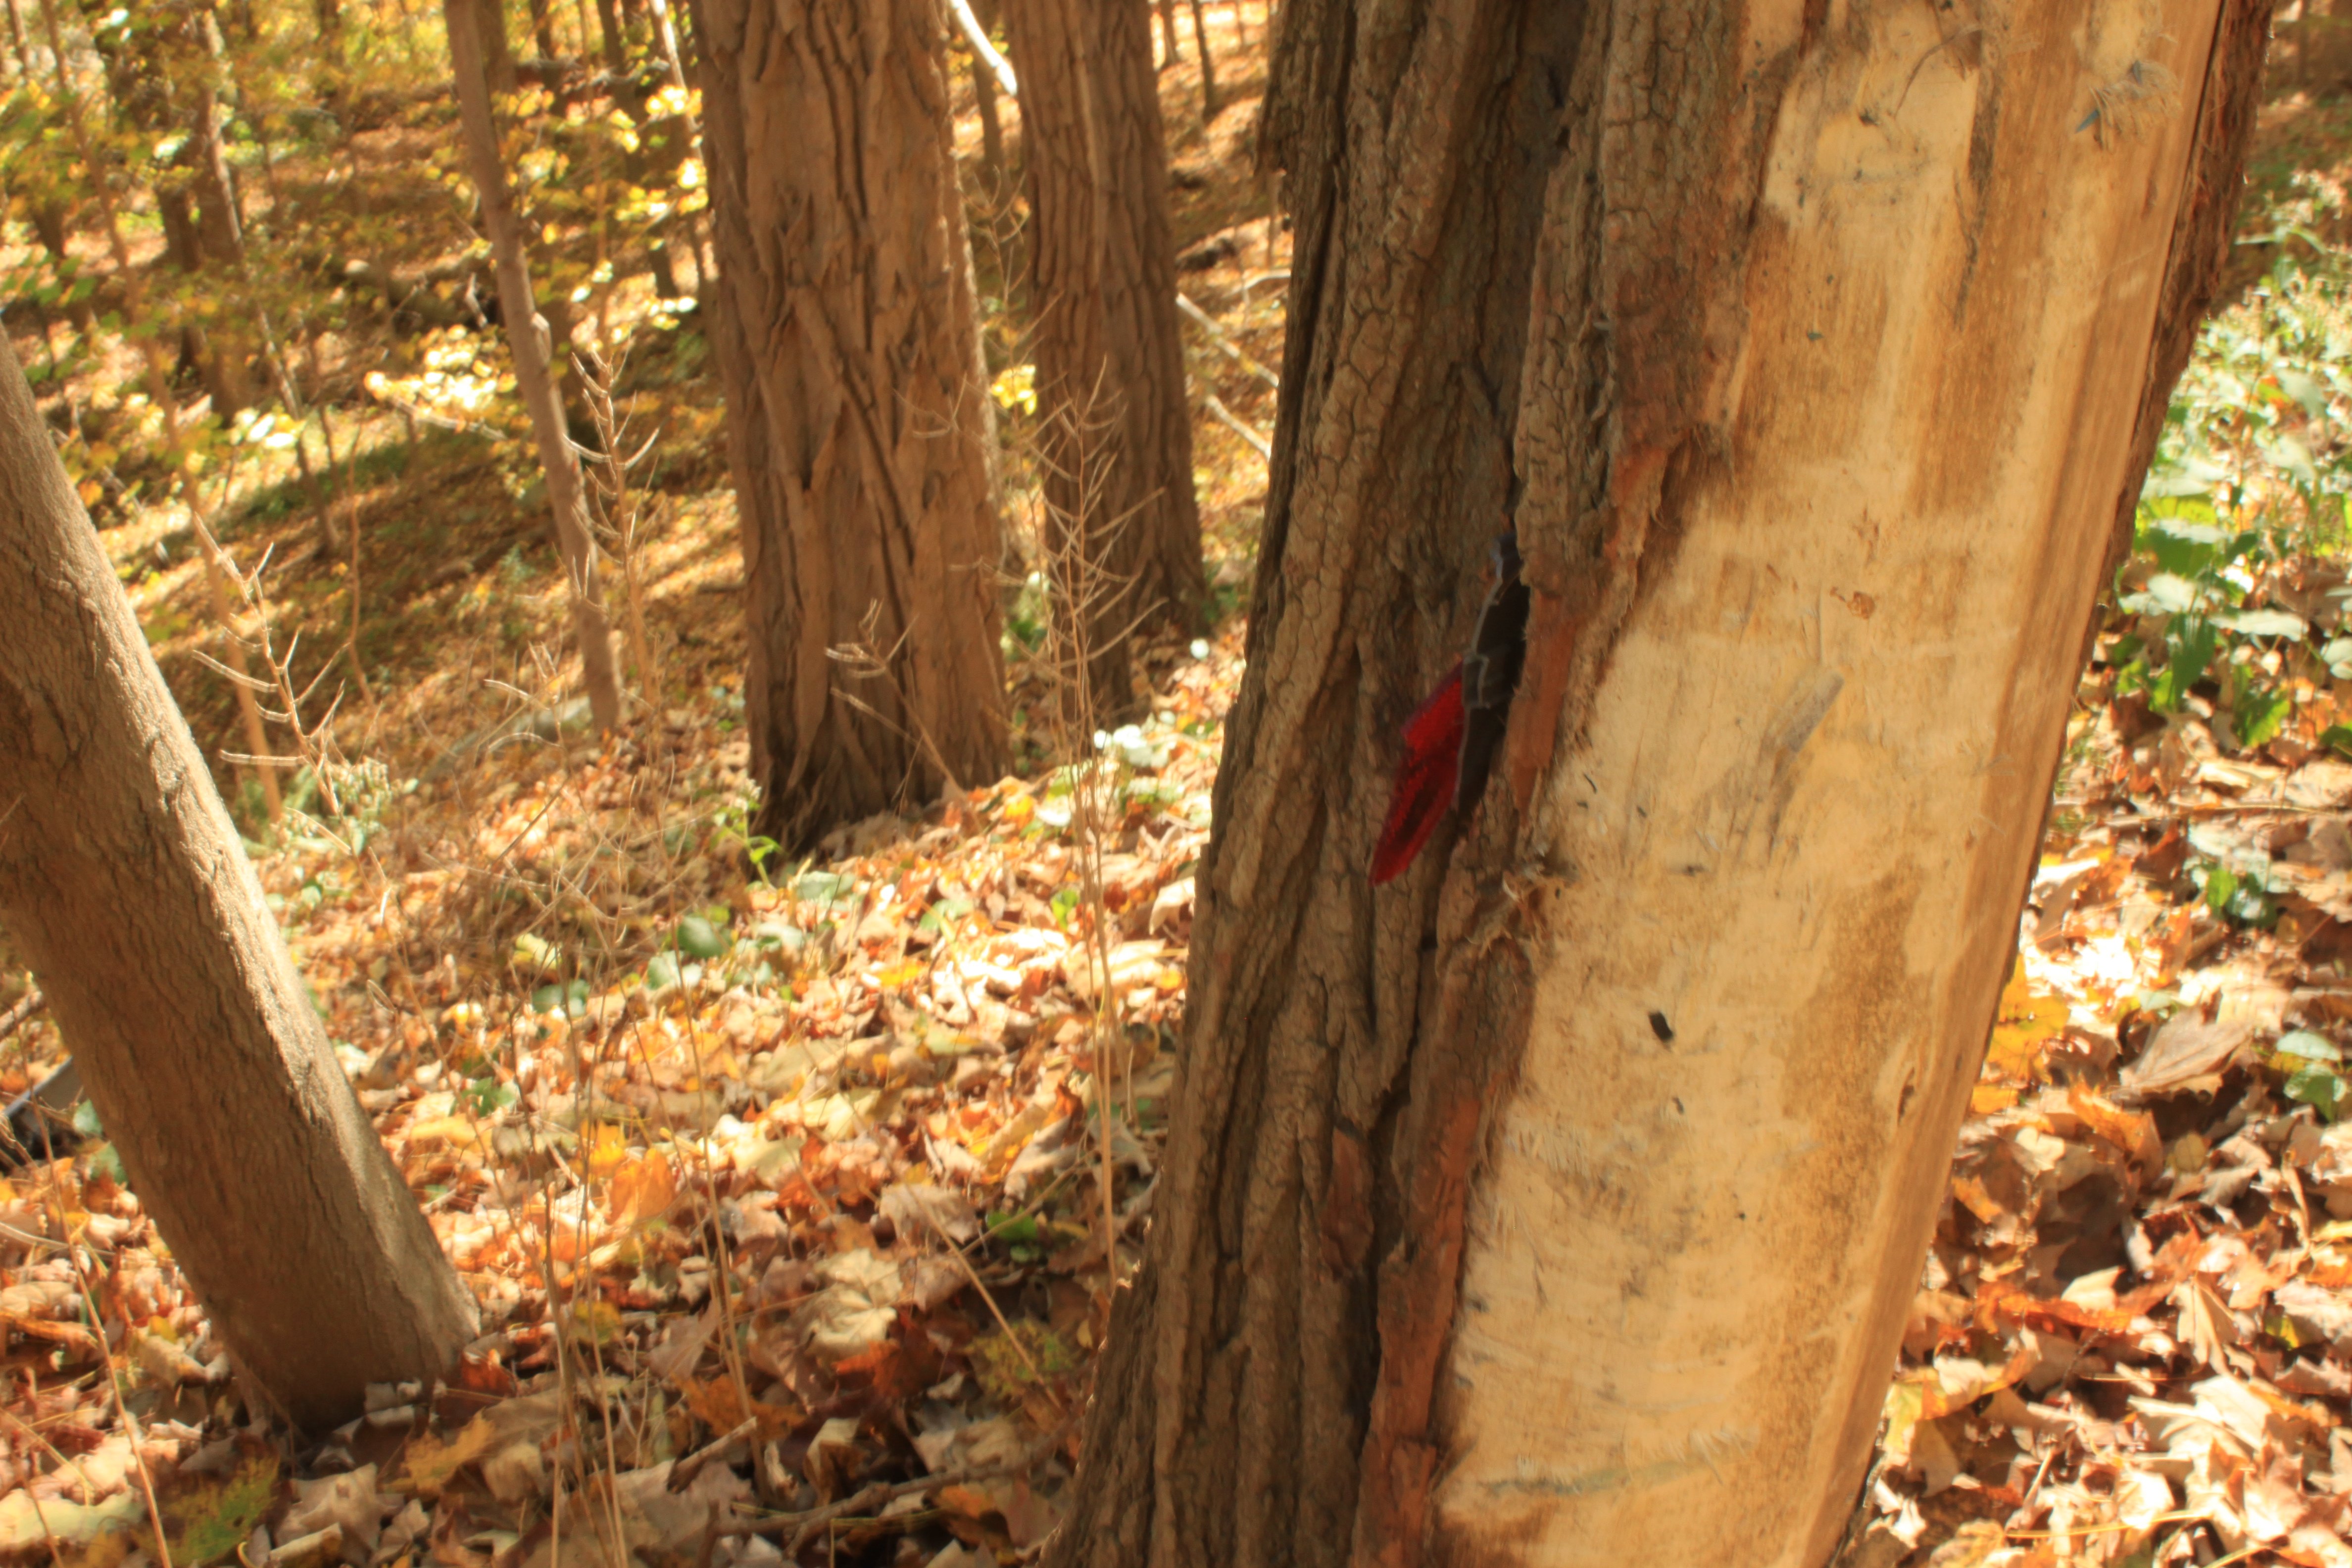 Red plastic embedded in a tree